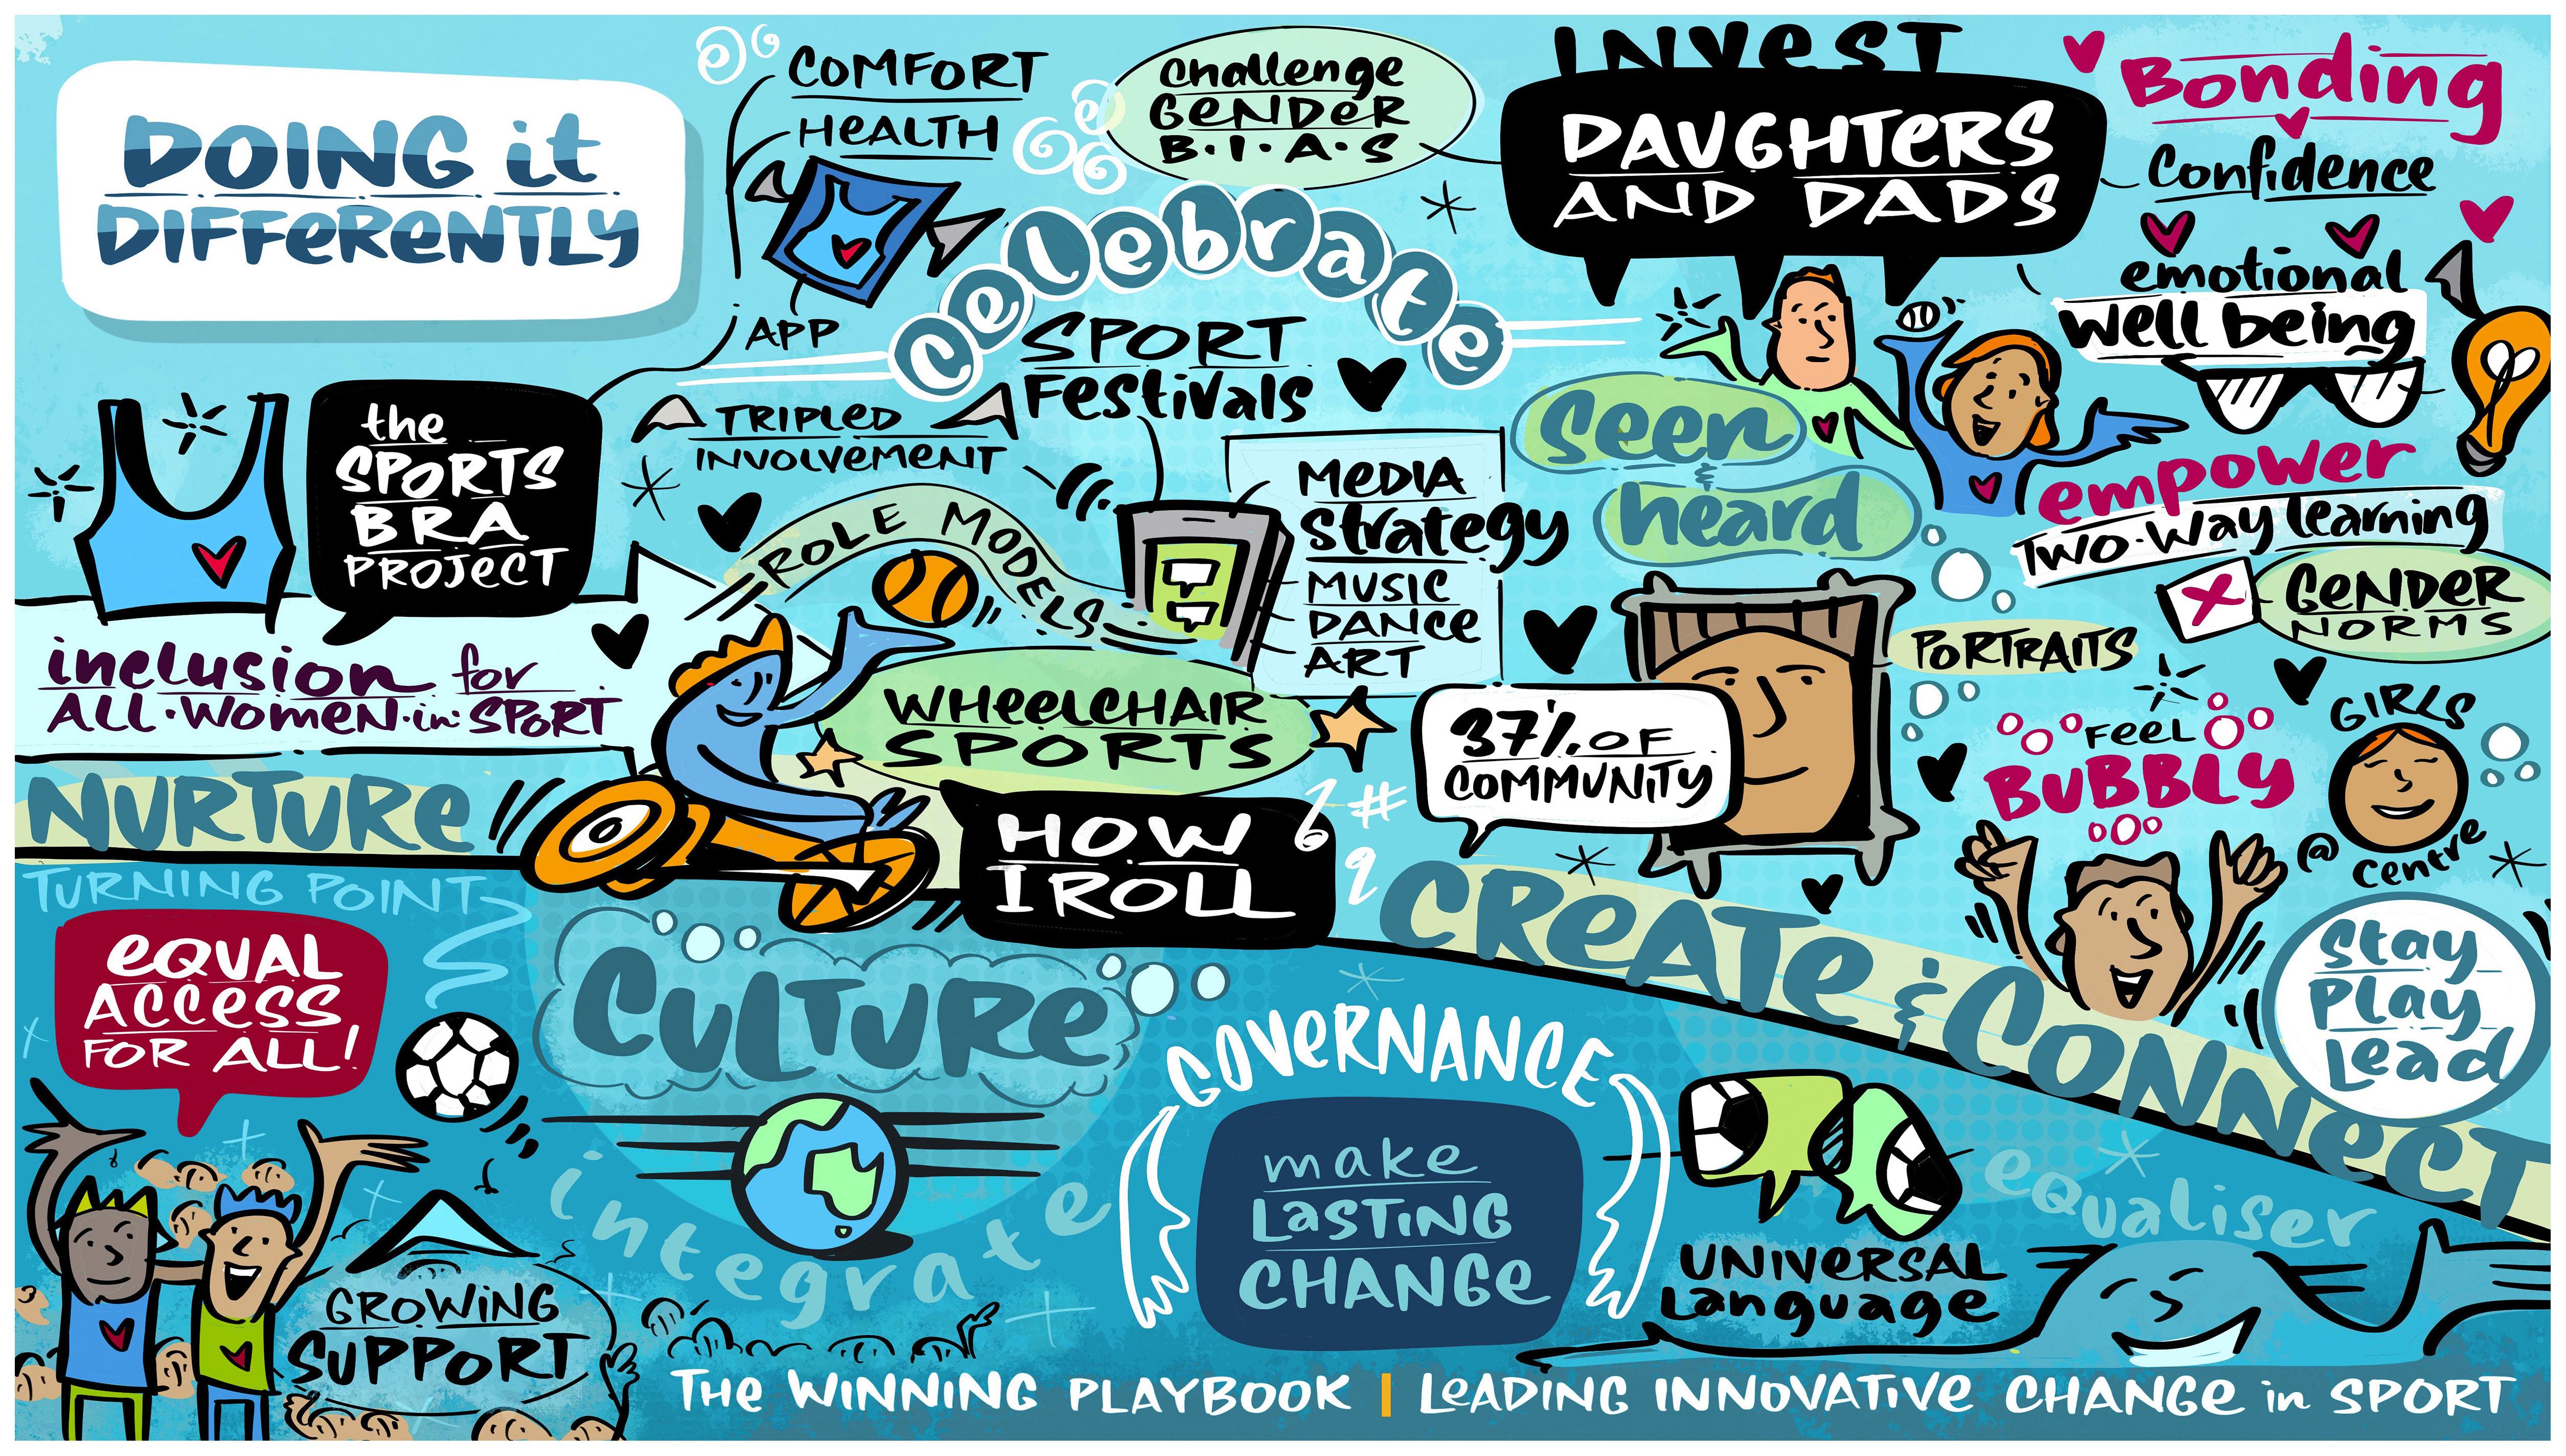 Live visual scribing created by Rachel Dight from Swivel at the event.